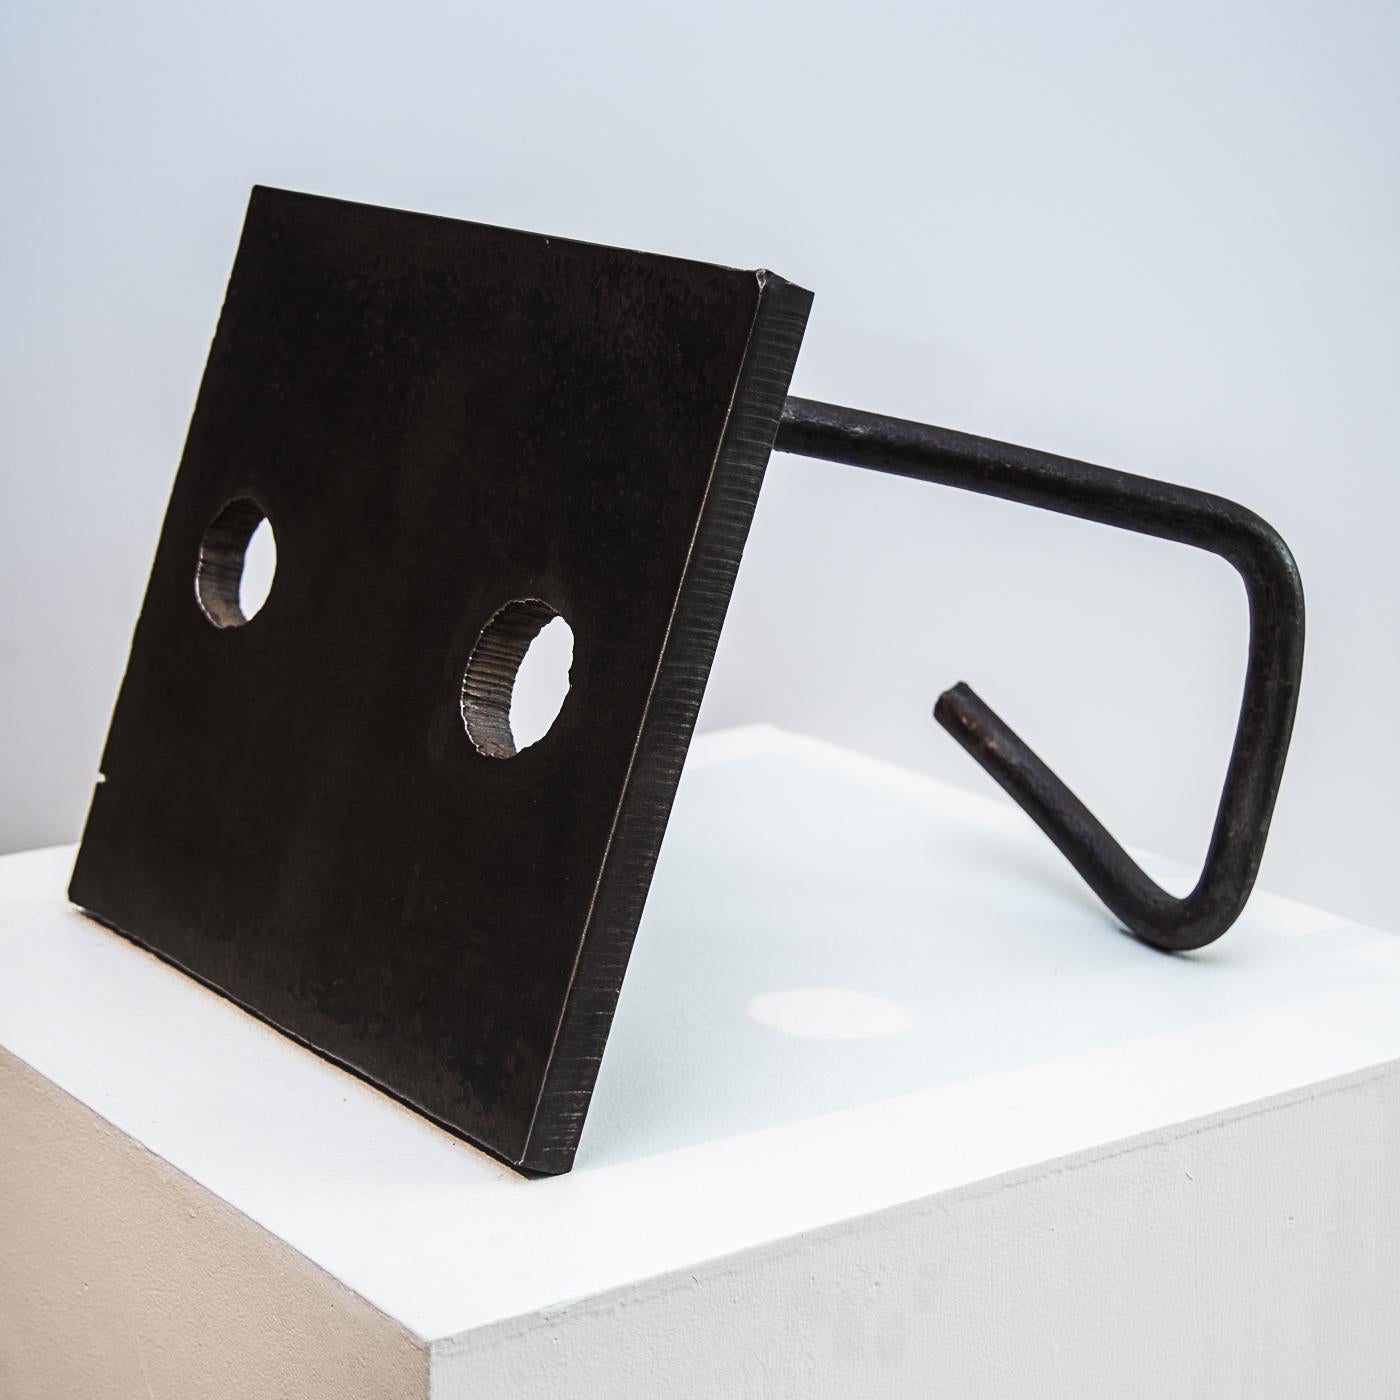 American Contemporary Abstract Welded Steel Sculpture by Scott Gordon (The Cat, 2014) For Sale